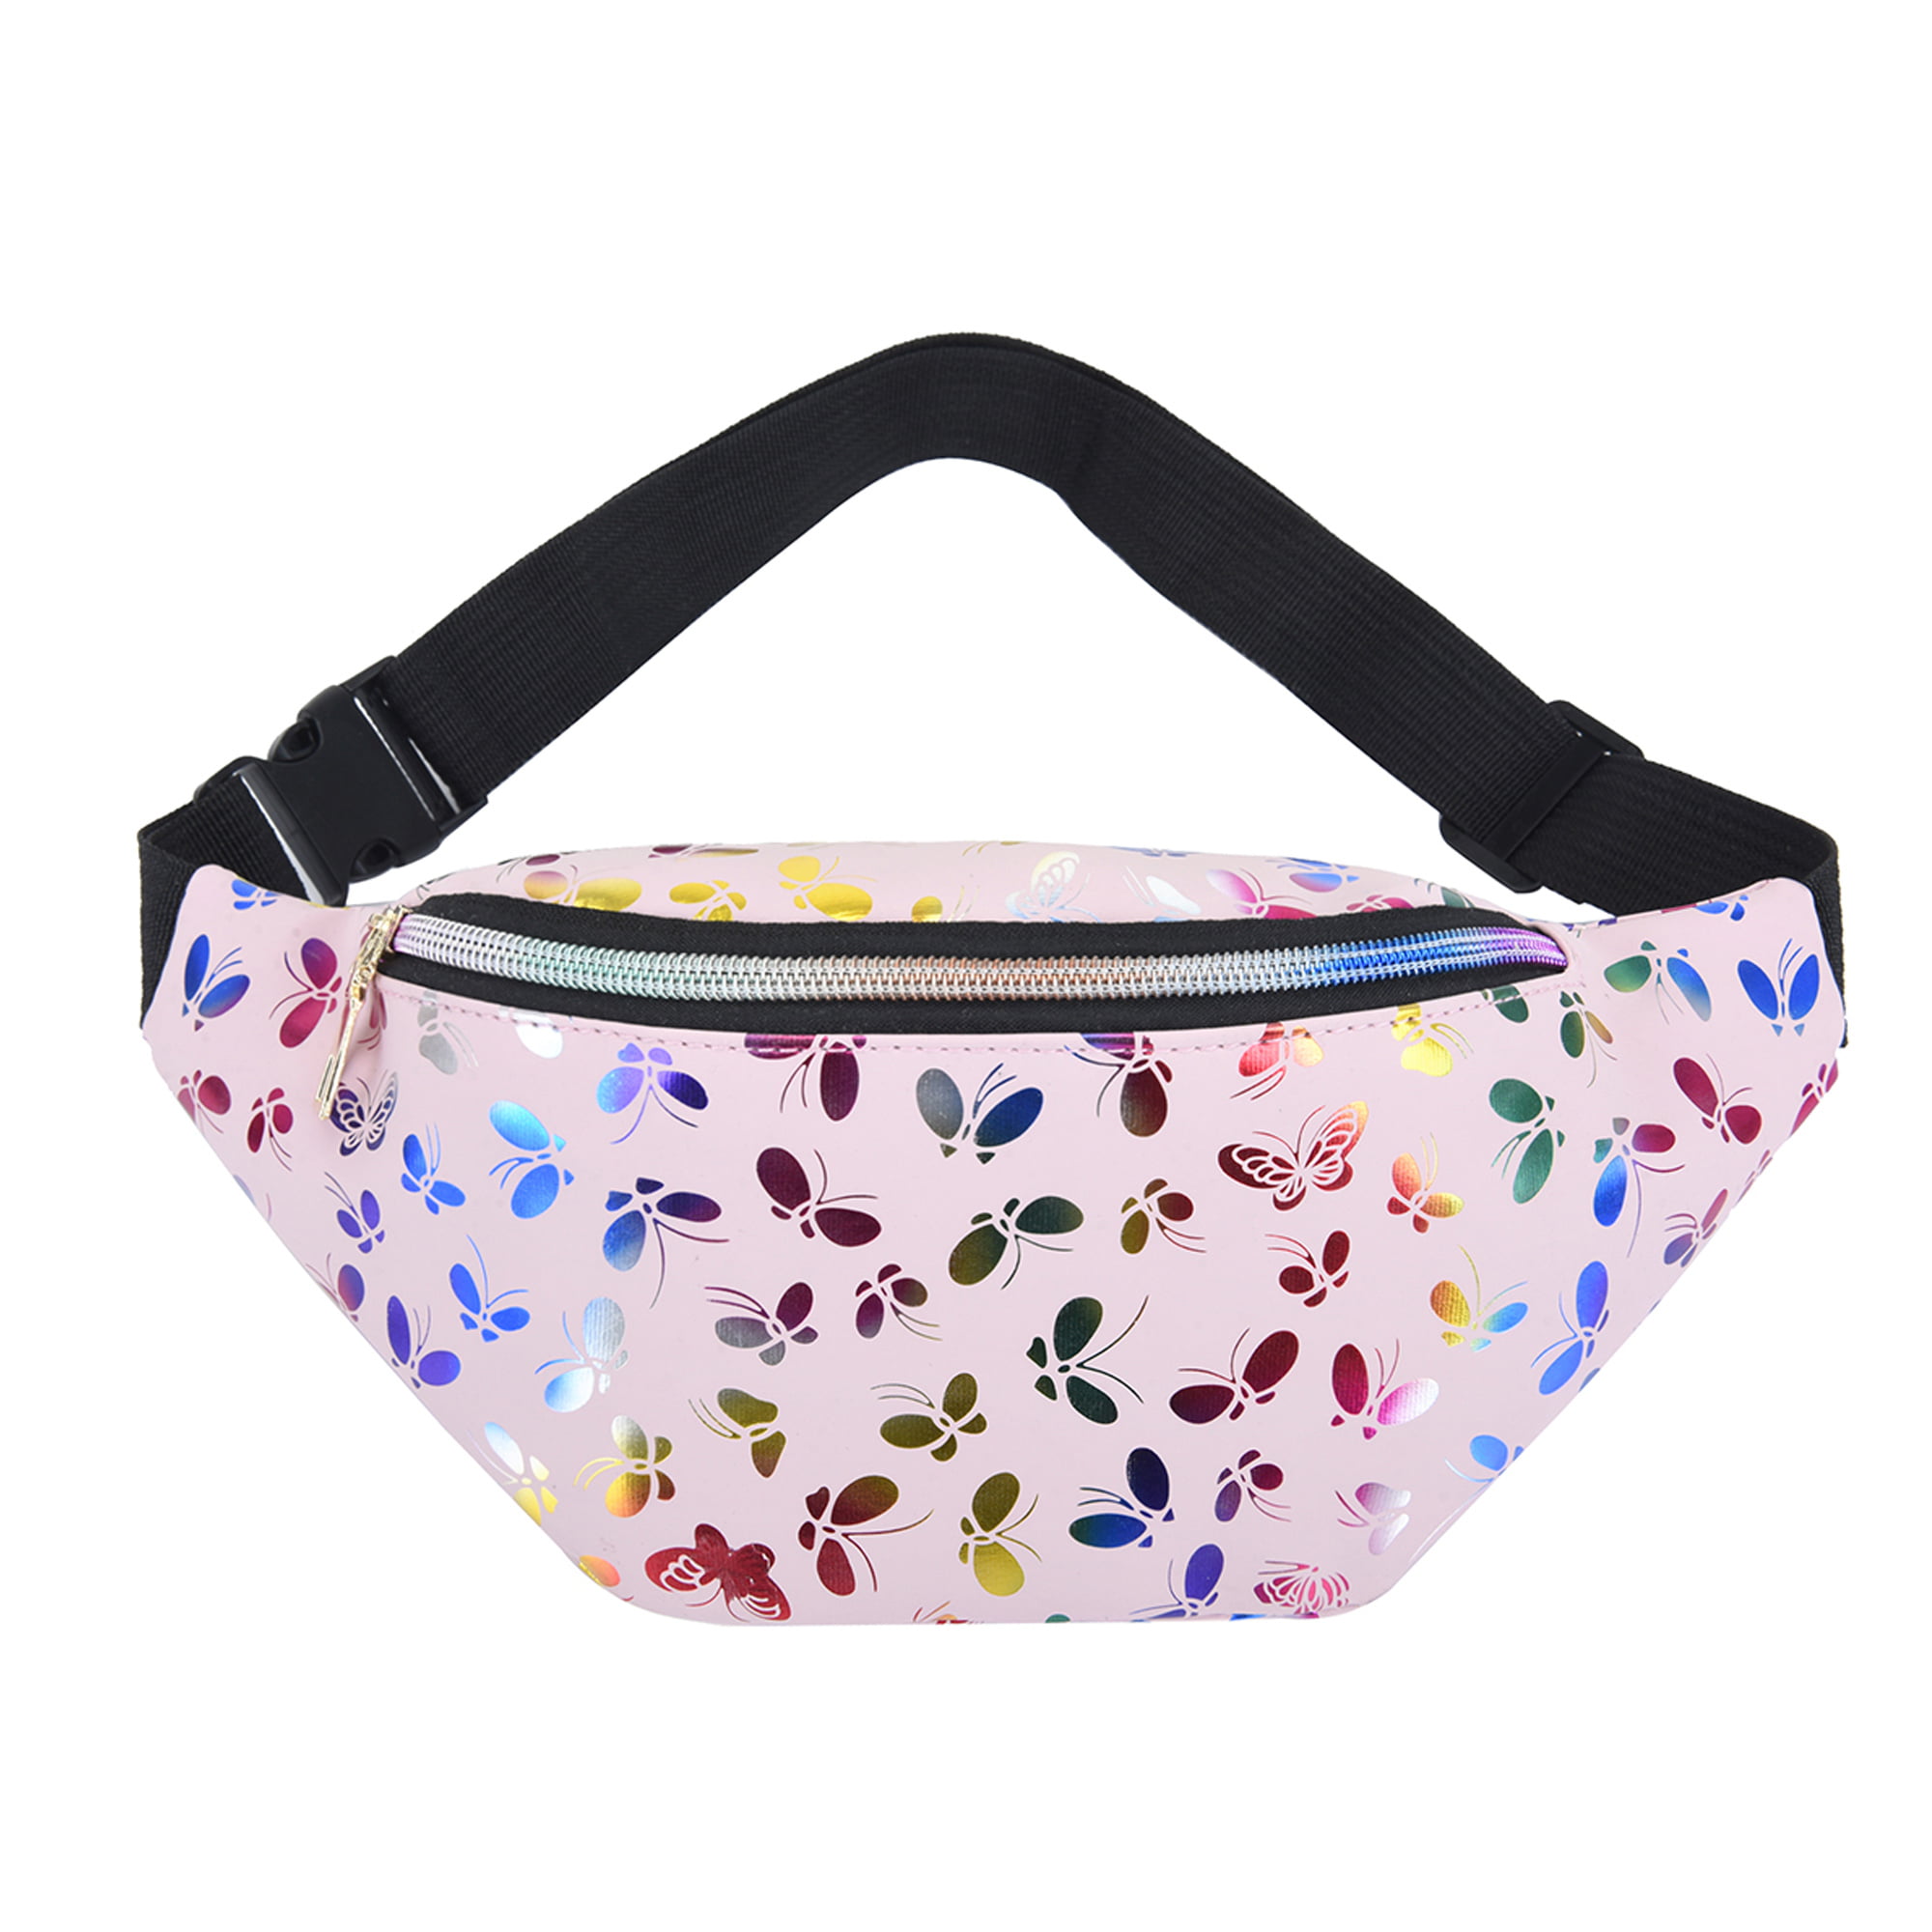 A Fuuny Dog Play The Piano Fenny Packs Waist Bags Adjustable Belt Waterproof Nylon Travel Running Sport Vacation Party For Men Women Boys Girls Kids